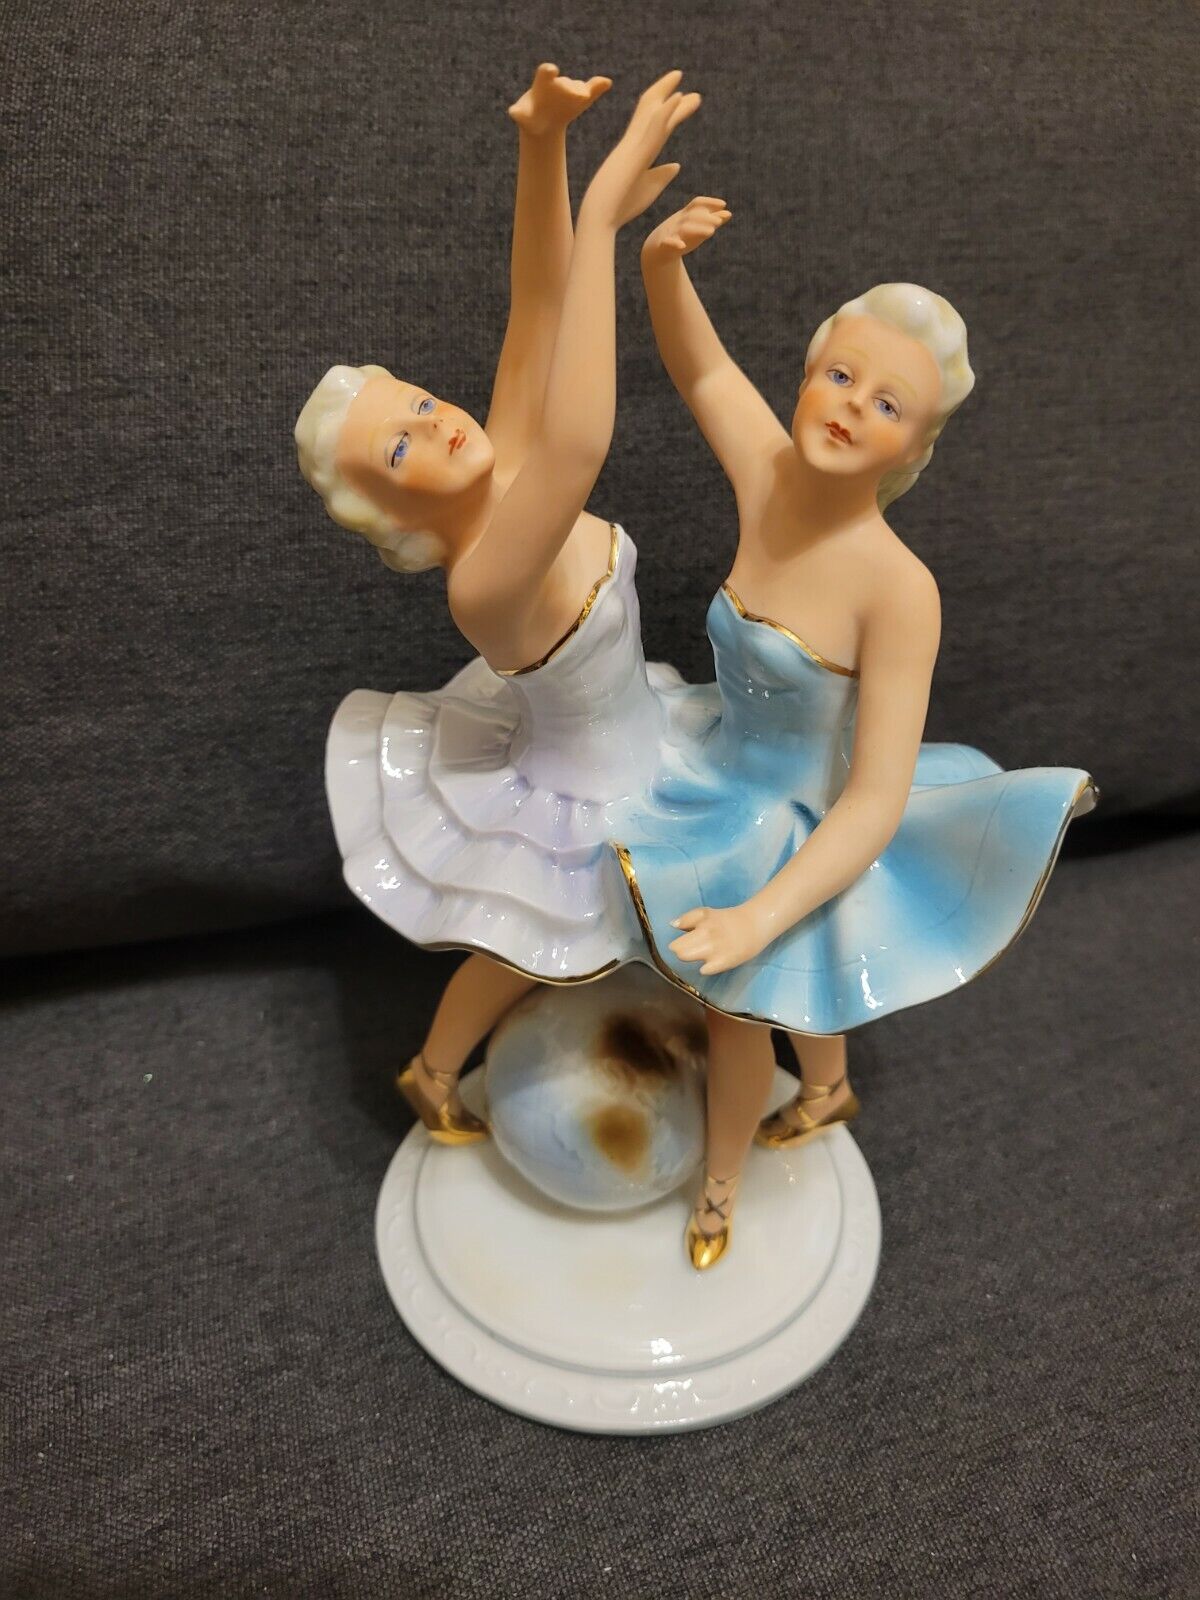 FASOLD AND STAUCH PORCELAIN TWO FEMALE BALLERINAS WITH GLOBE FIGURINE GERMAN